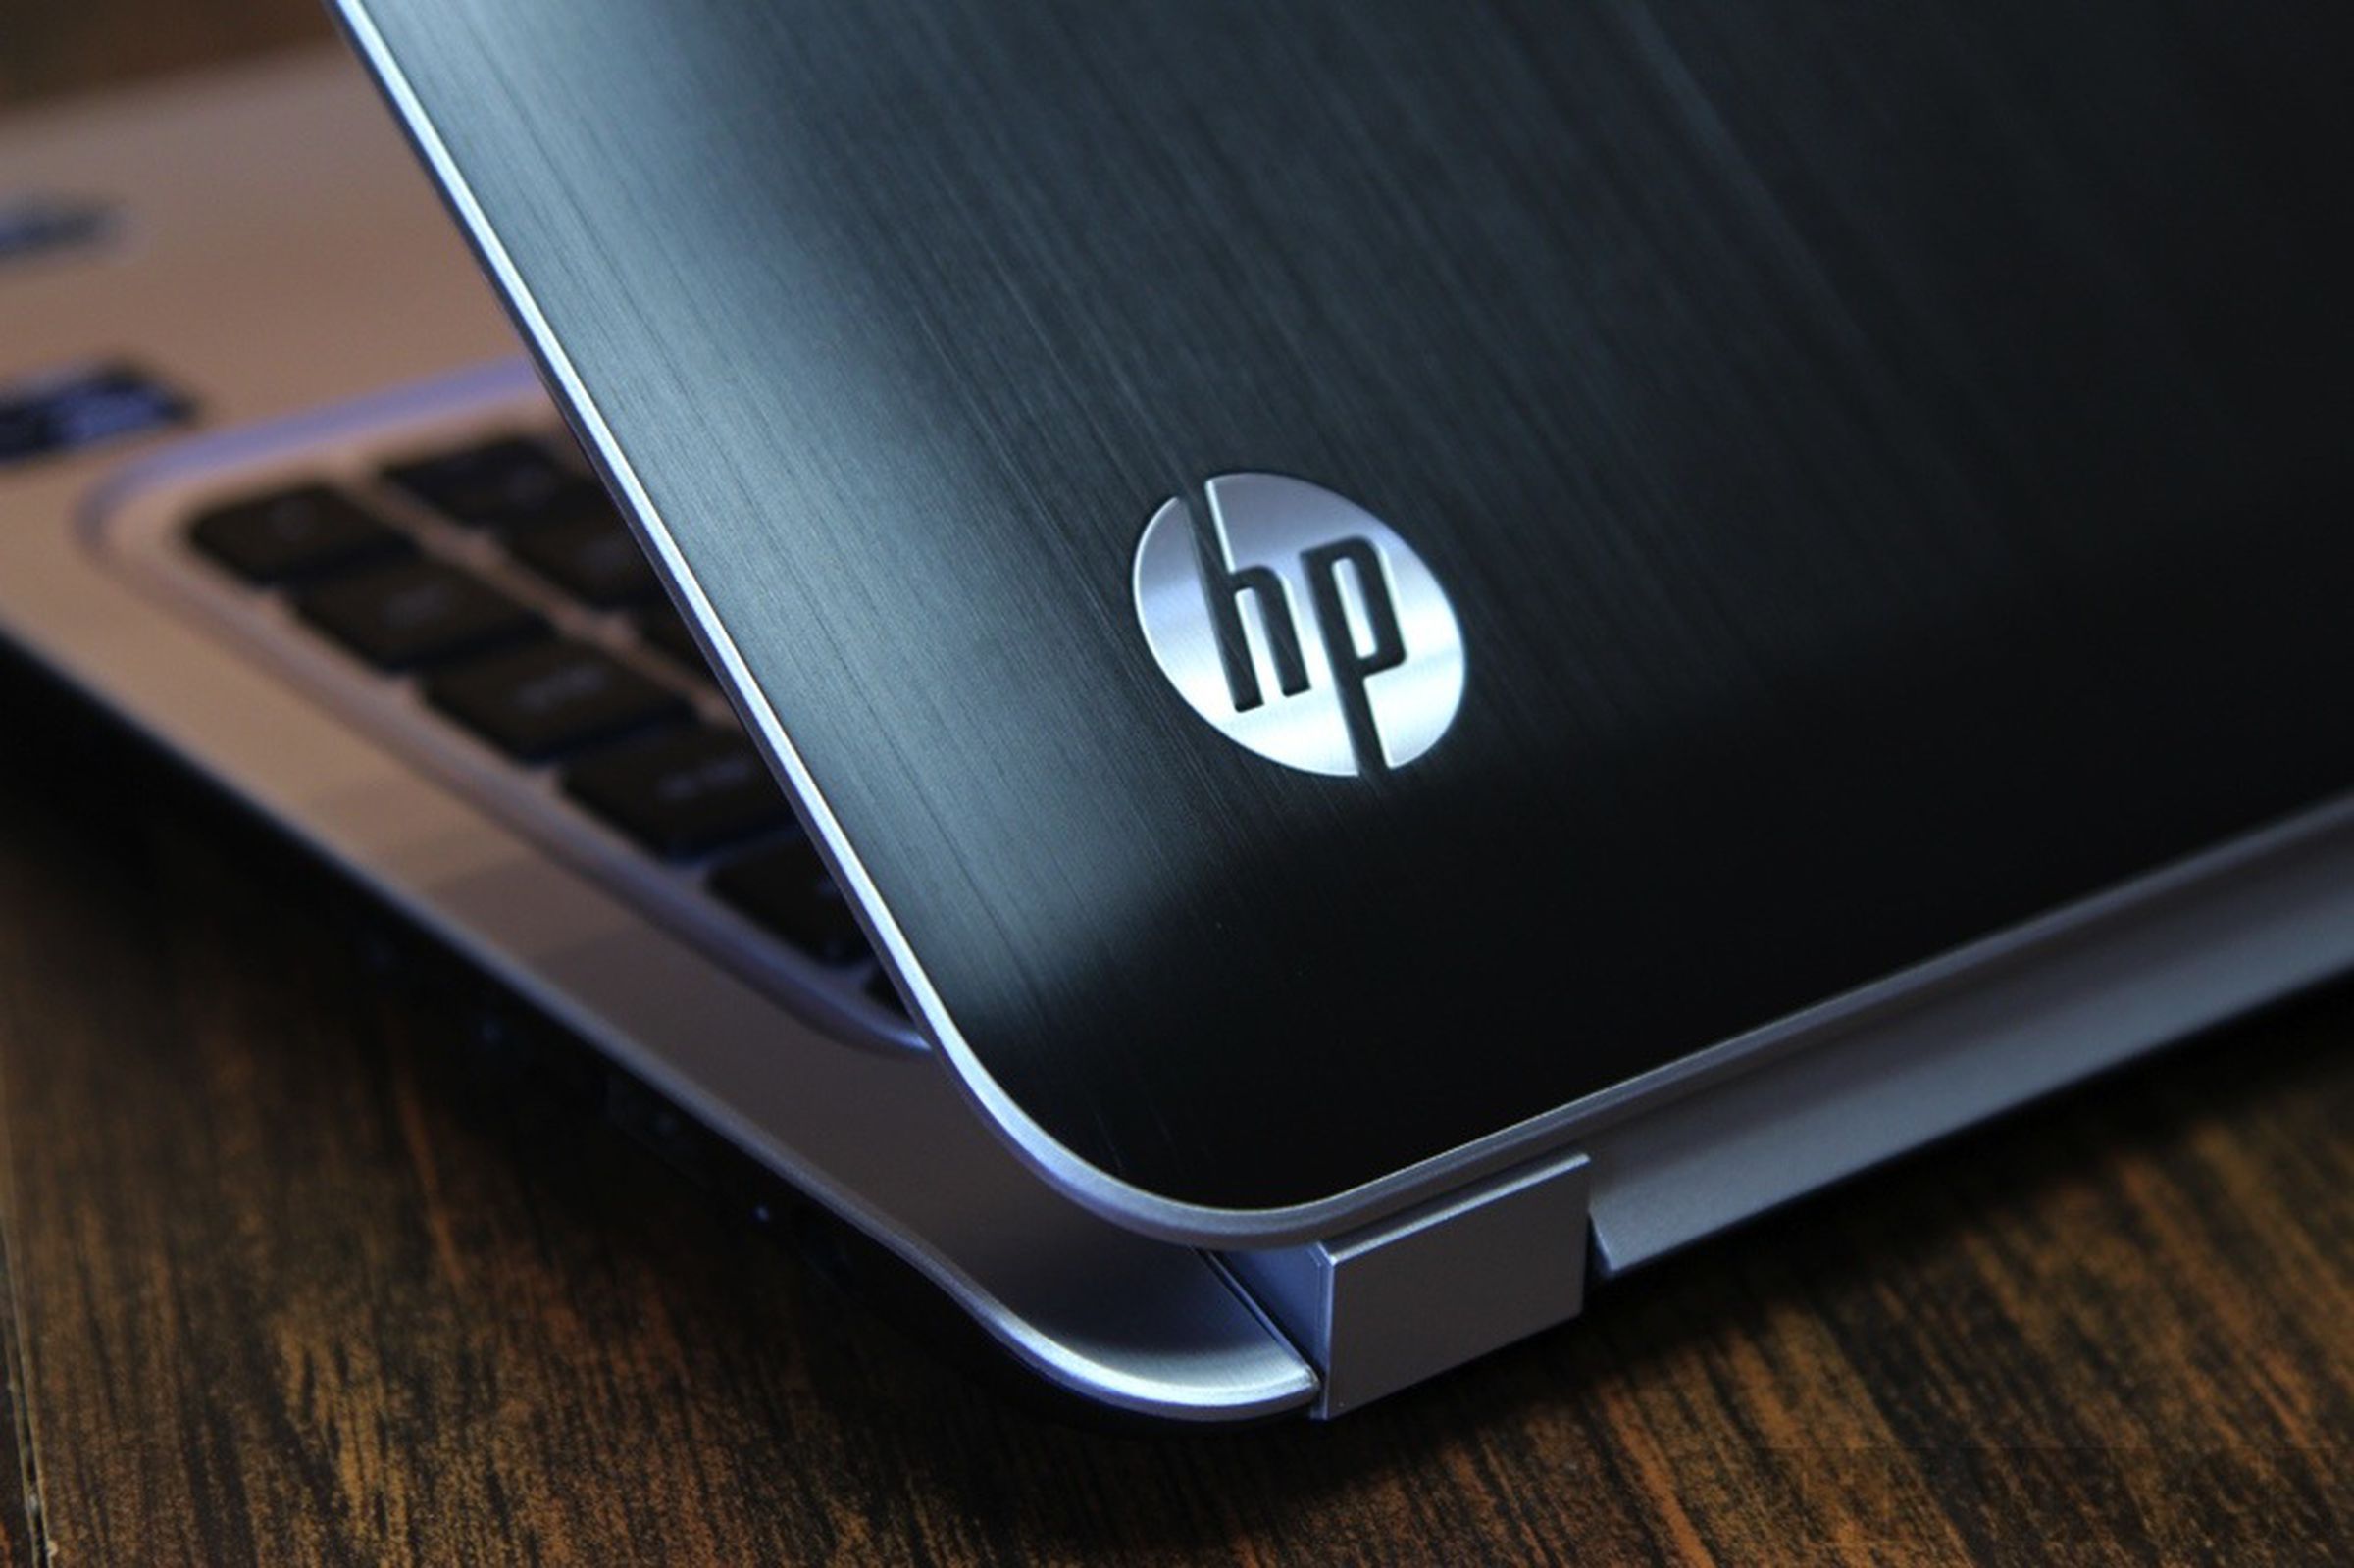 HP Envy TouchSmart Ultrabook 4 pictures